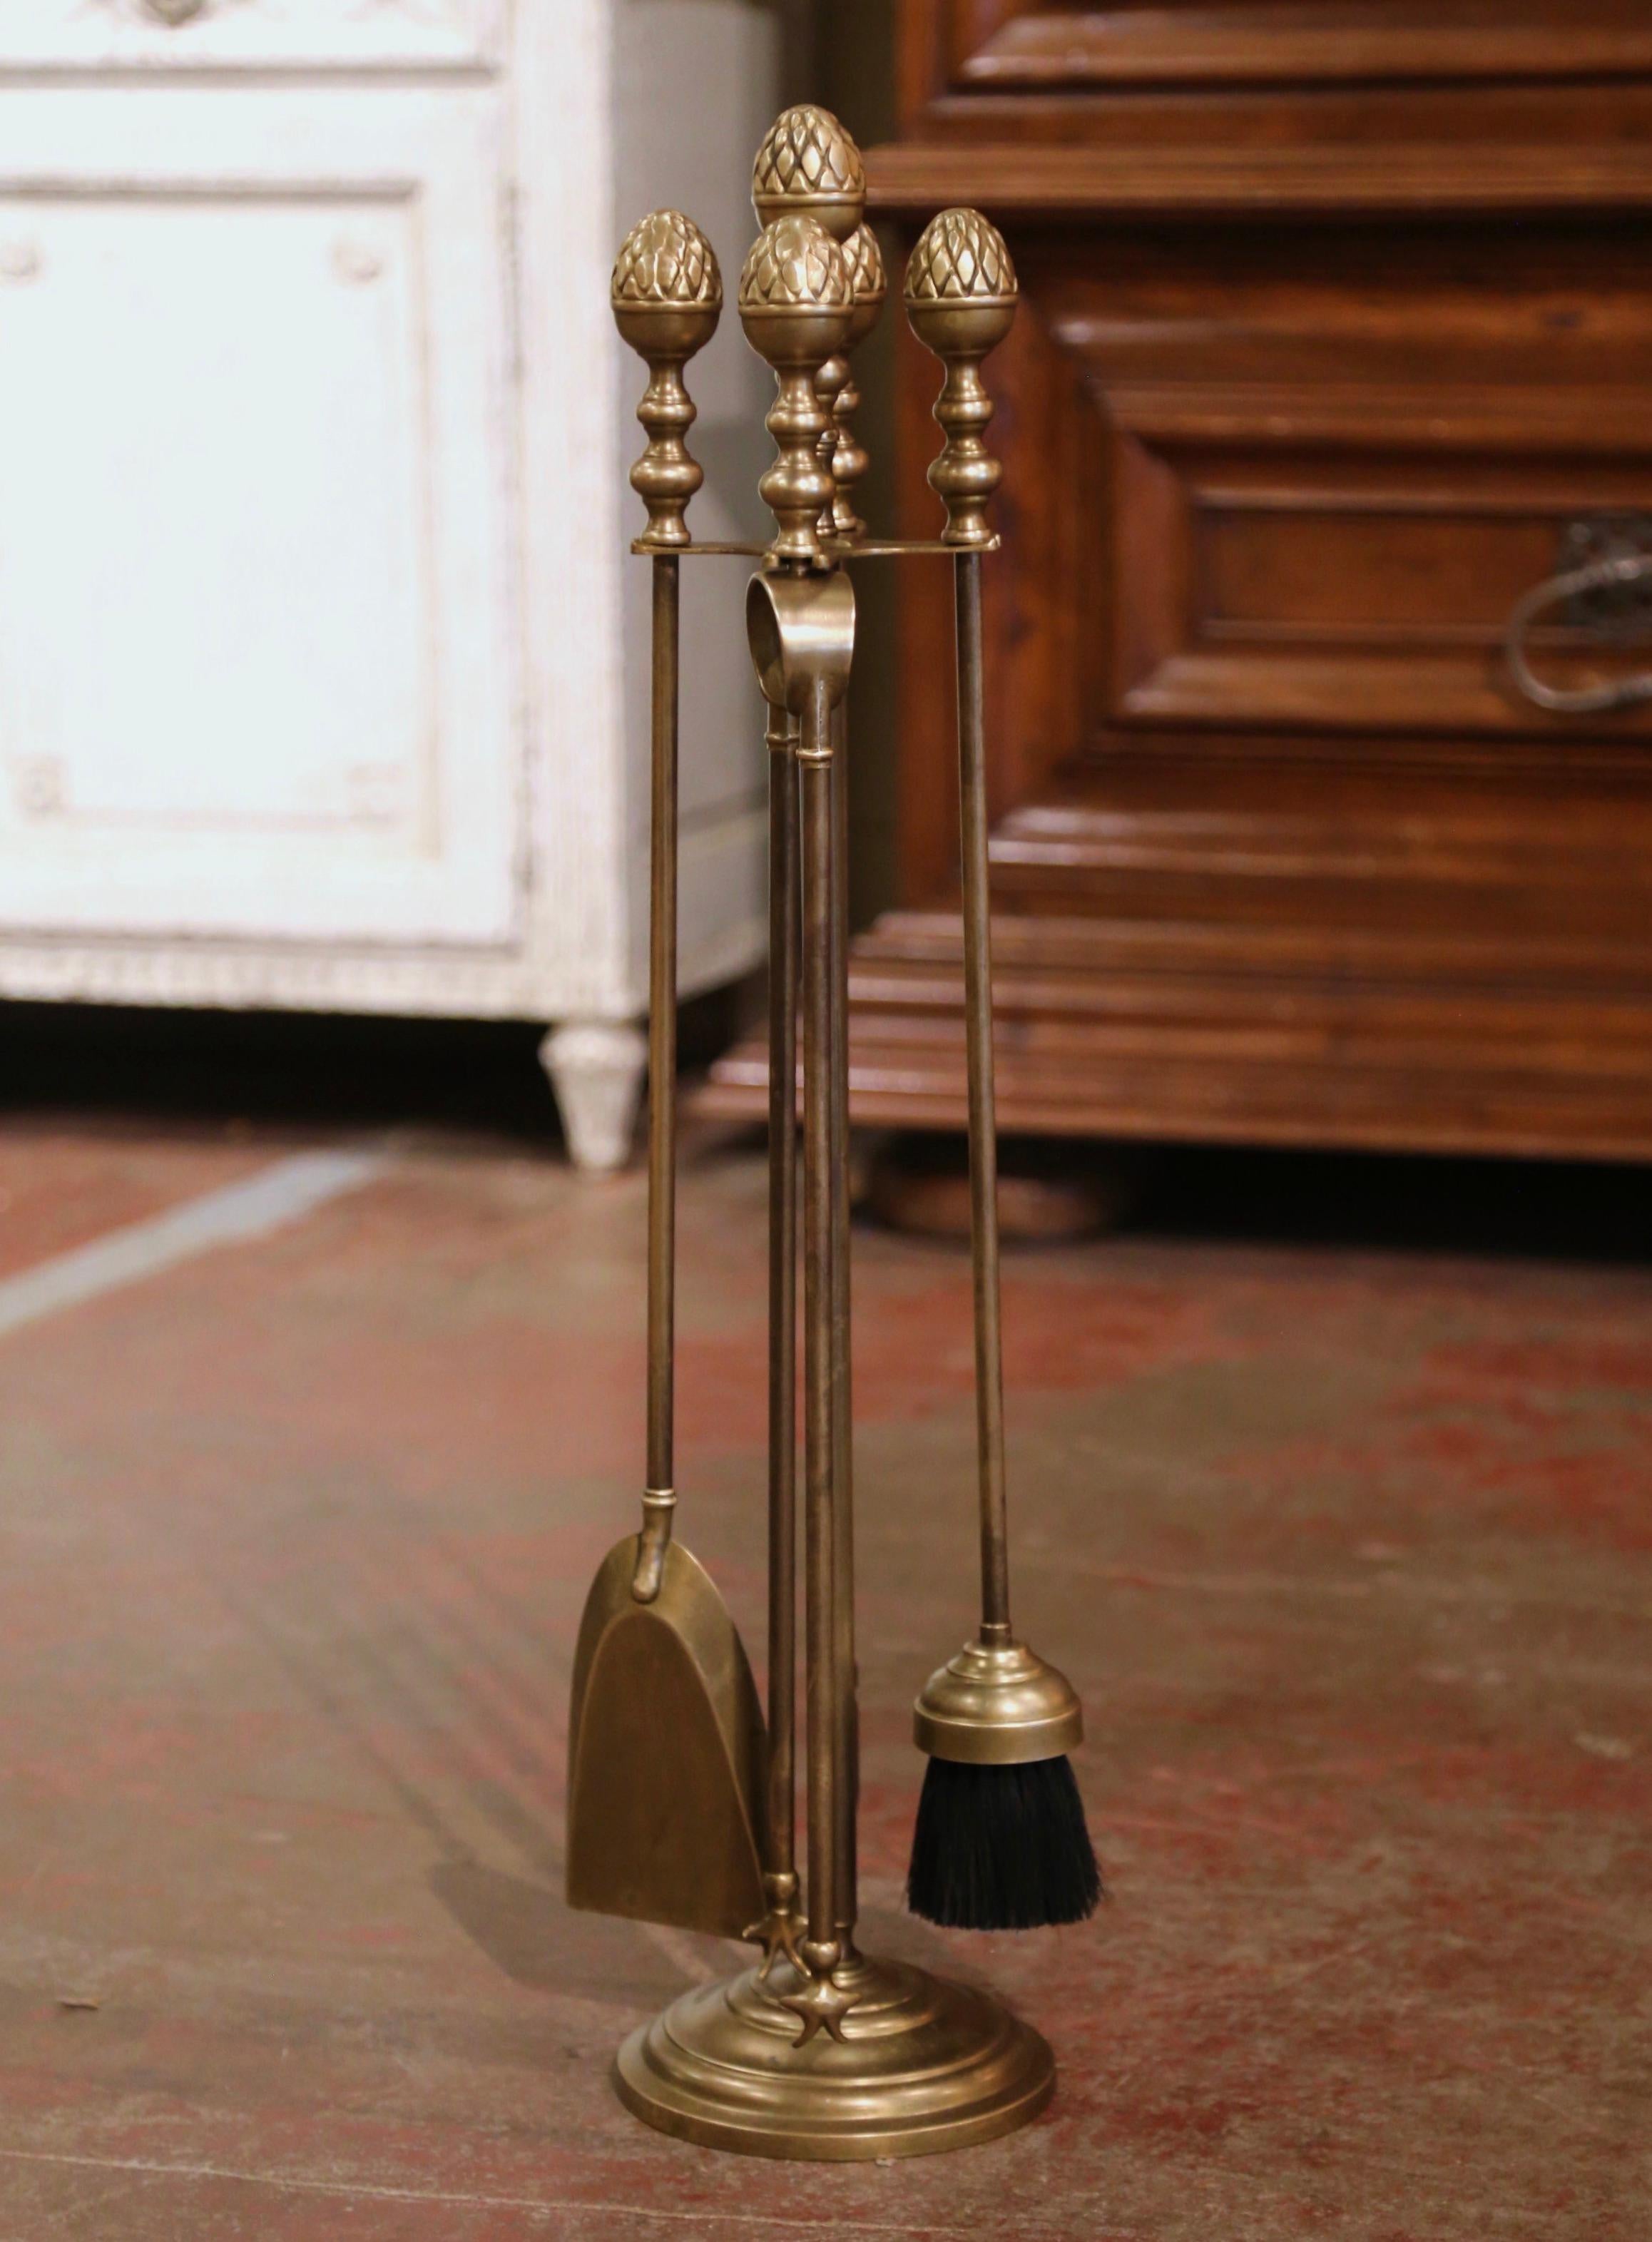 Place this elegant antique fireplace tool set next to your mantel. Crafted in France circa 1880 and made of solid brass, the Rococo 